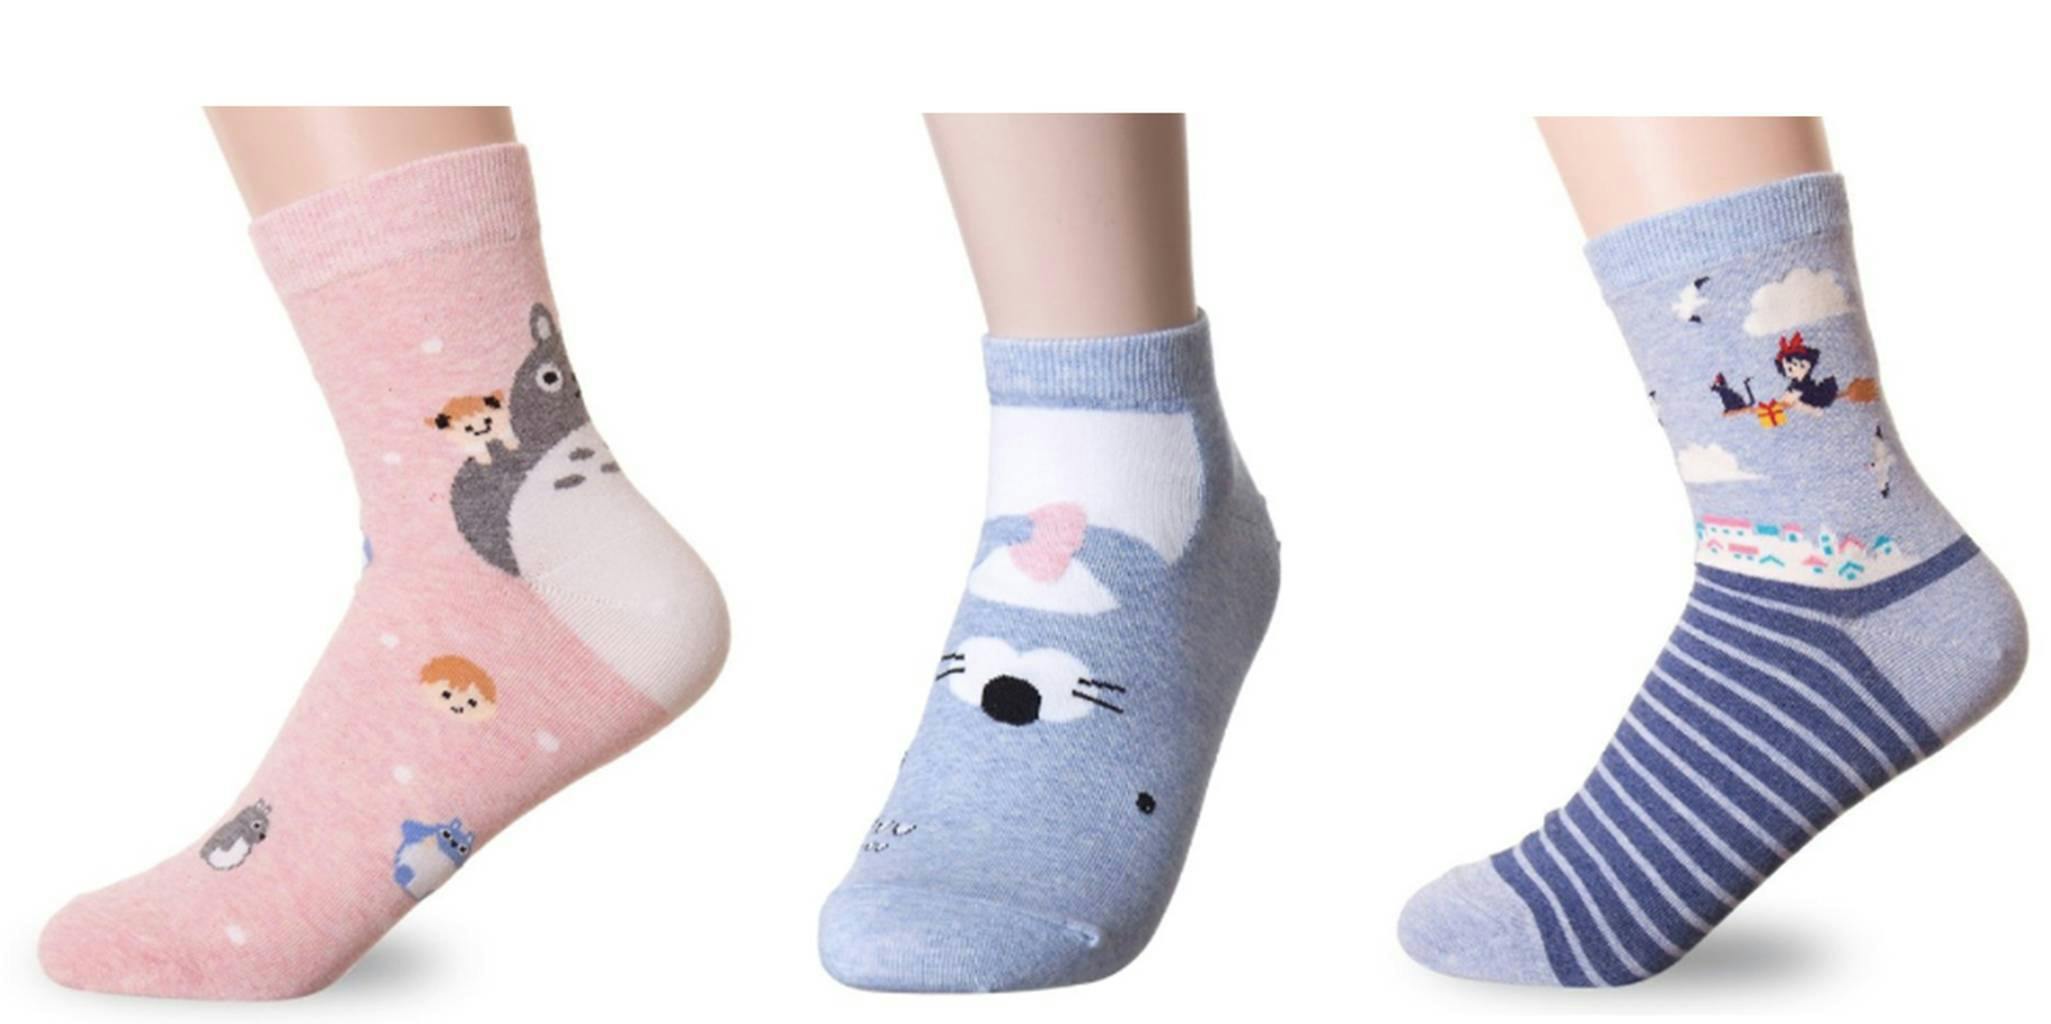 Complete your anime aesthetic with this awesome sock deal - The Daily Dot